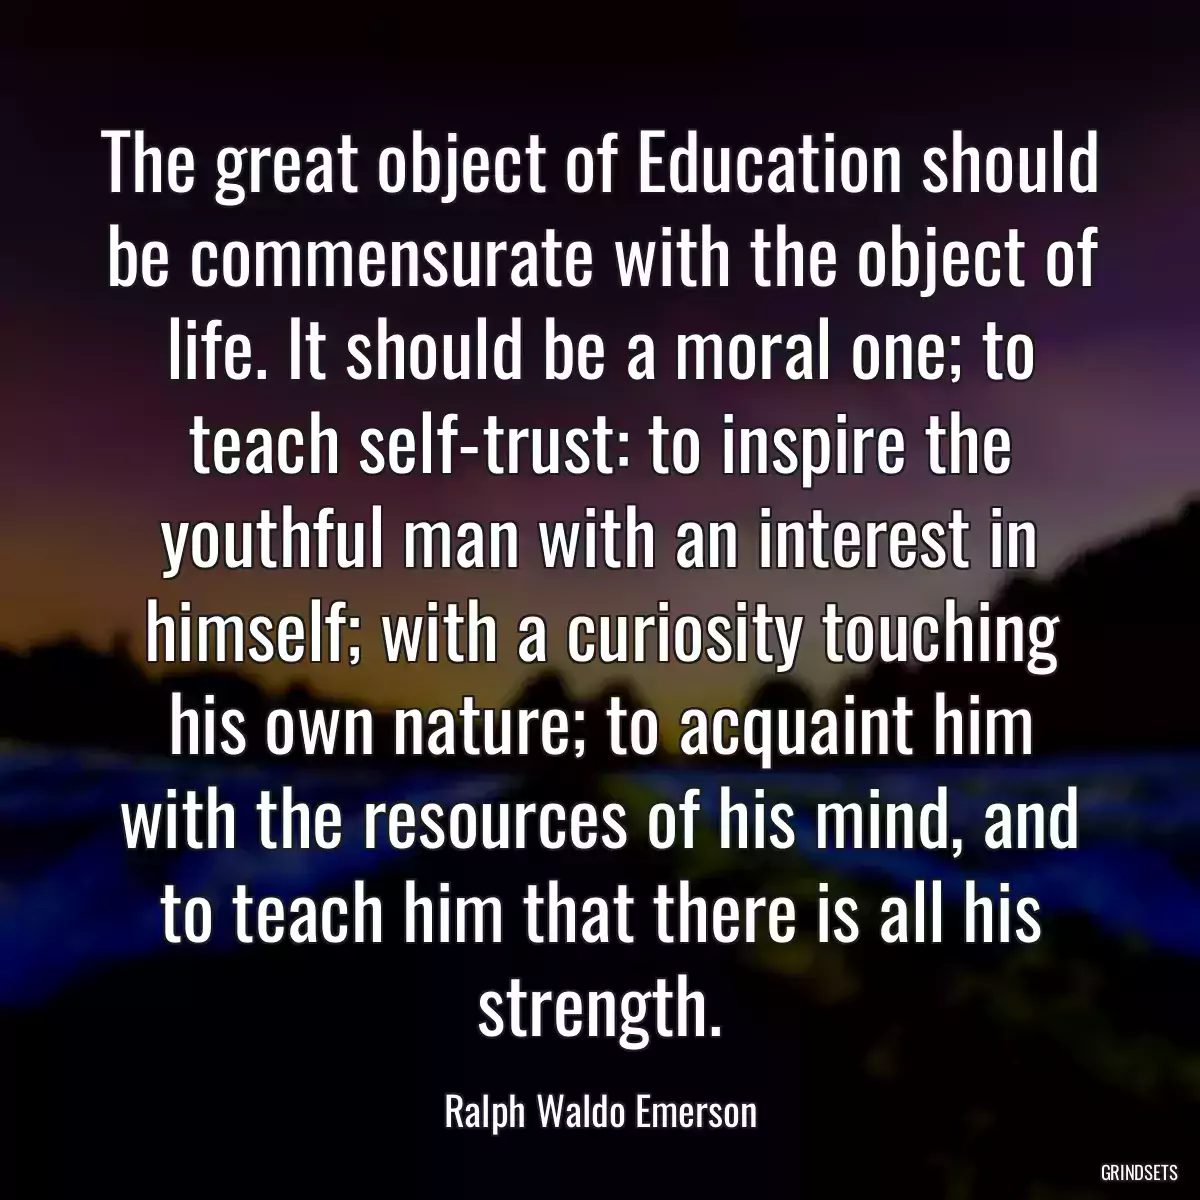 The great object of Education should be commensurate with the object of life. It should be a moral one; to teach self-trust: to inspire the youthful man with an interest in himself; with a curiosity touching his own nature; to acquaint him with the resources of his mind, and to teach him that there is all his strength.